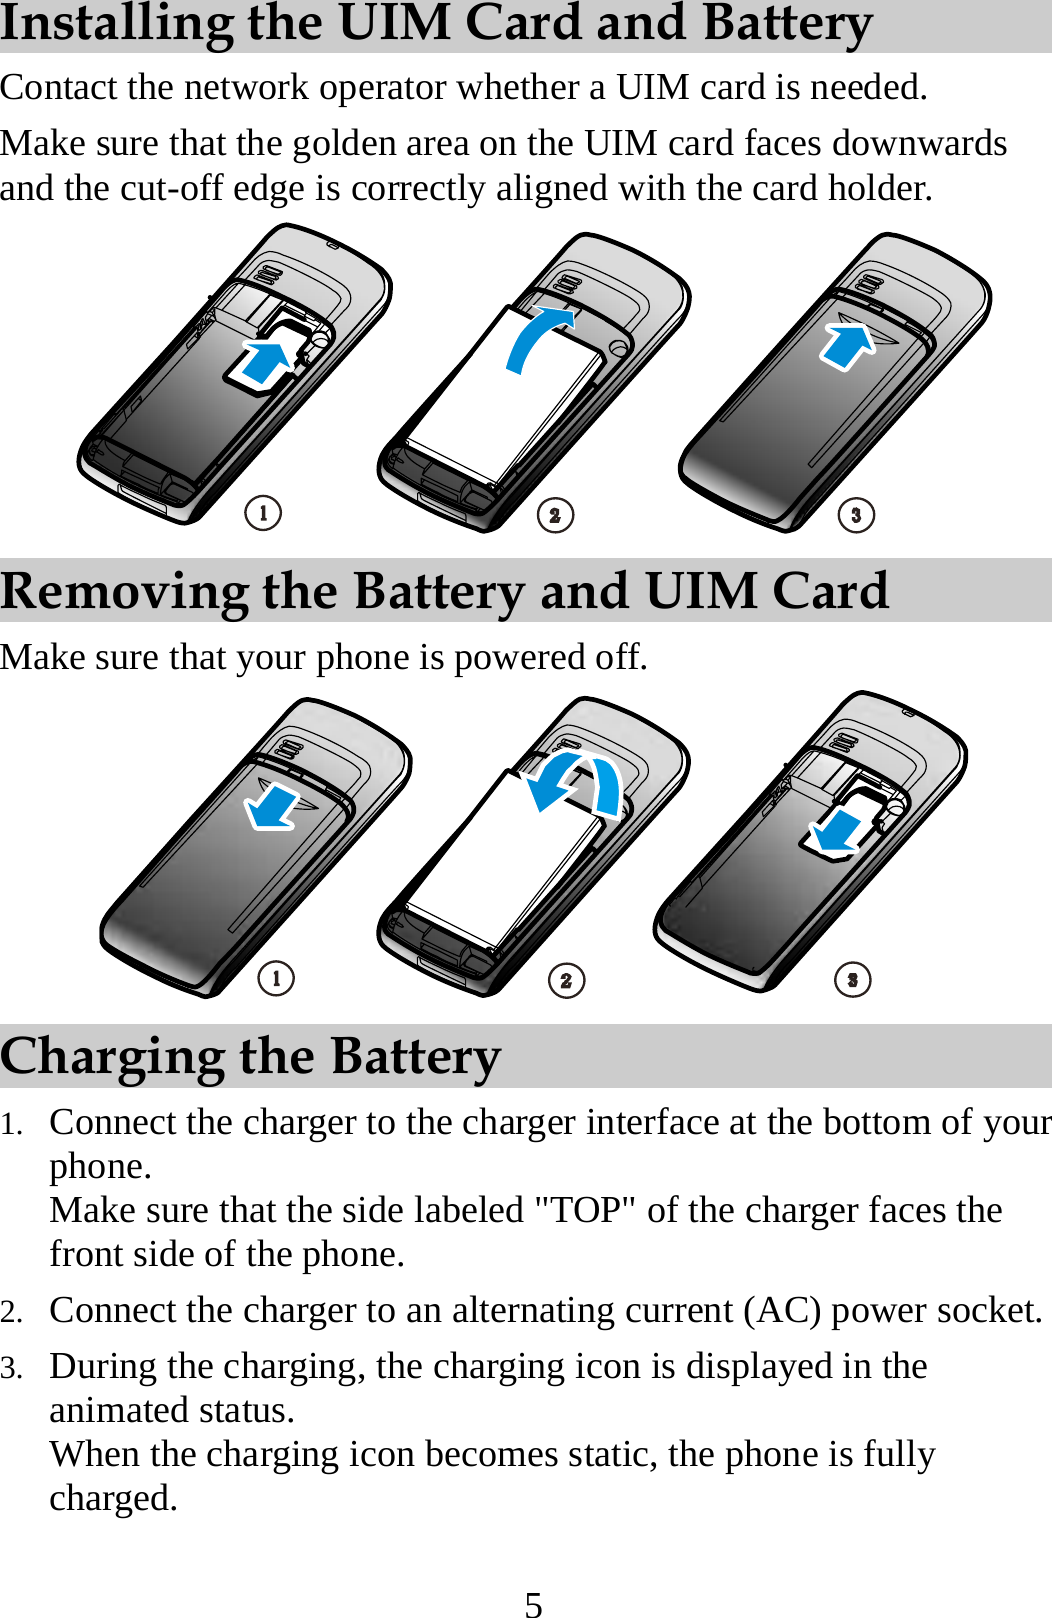 5 Installing the UIM Card and Battery Contact the network operator whether a UIM card is needed. Make sure that the golden area on the UIM card faces downwards and the cut-off edge is correctly aligned with the card holder.  Removing the Battery and UIM Card Make sure that your phone is powered off.  Charging the Battery 1. Connect the charger to the charger interface at the bottom of your phone. Make sure that the side labeled &quot;TOP&quot; of the charger faces the front side of the phone. 2. Connect the charger to an alternating current (AC) power socket. 3. During the charging, the charging icon is displayed in the animated status. When the charging icon becomes static, the phone is fully charged. 